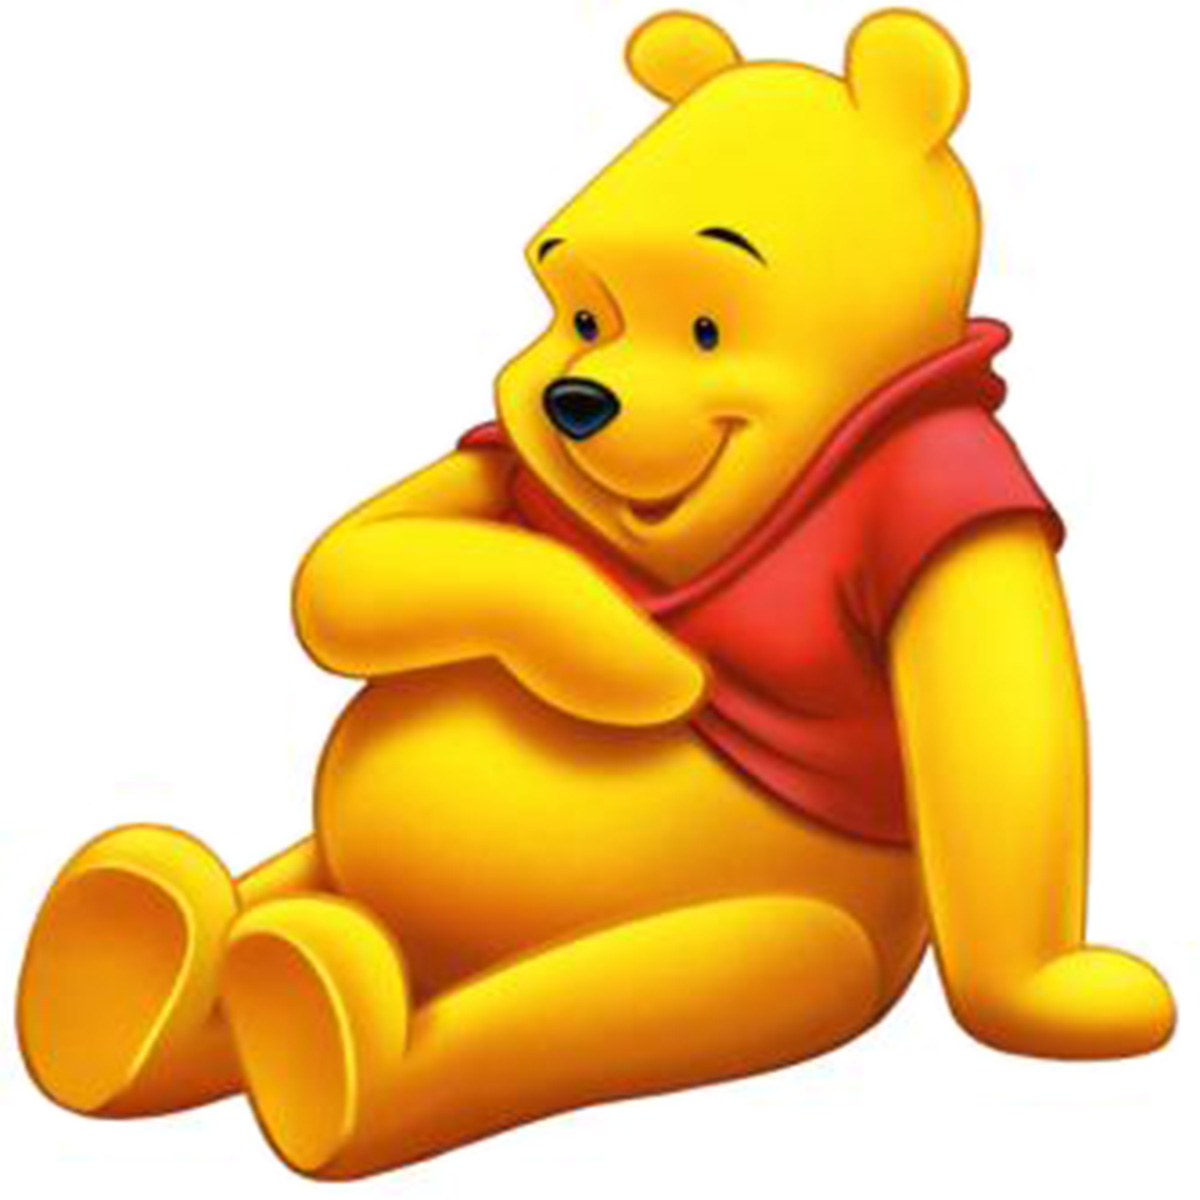 1000+ images about 3 Winnie the Pooh | Disney, Famous ...